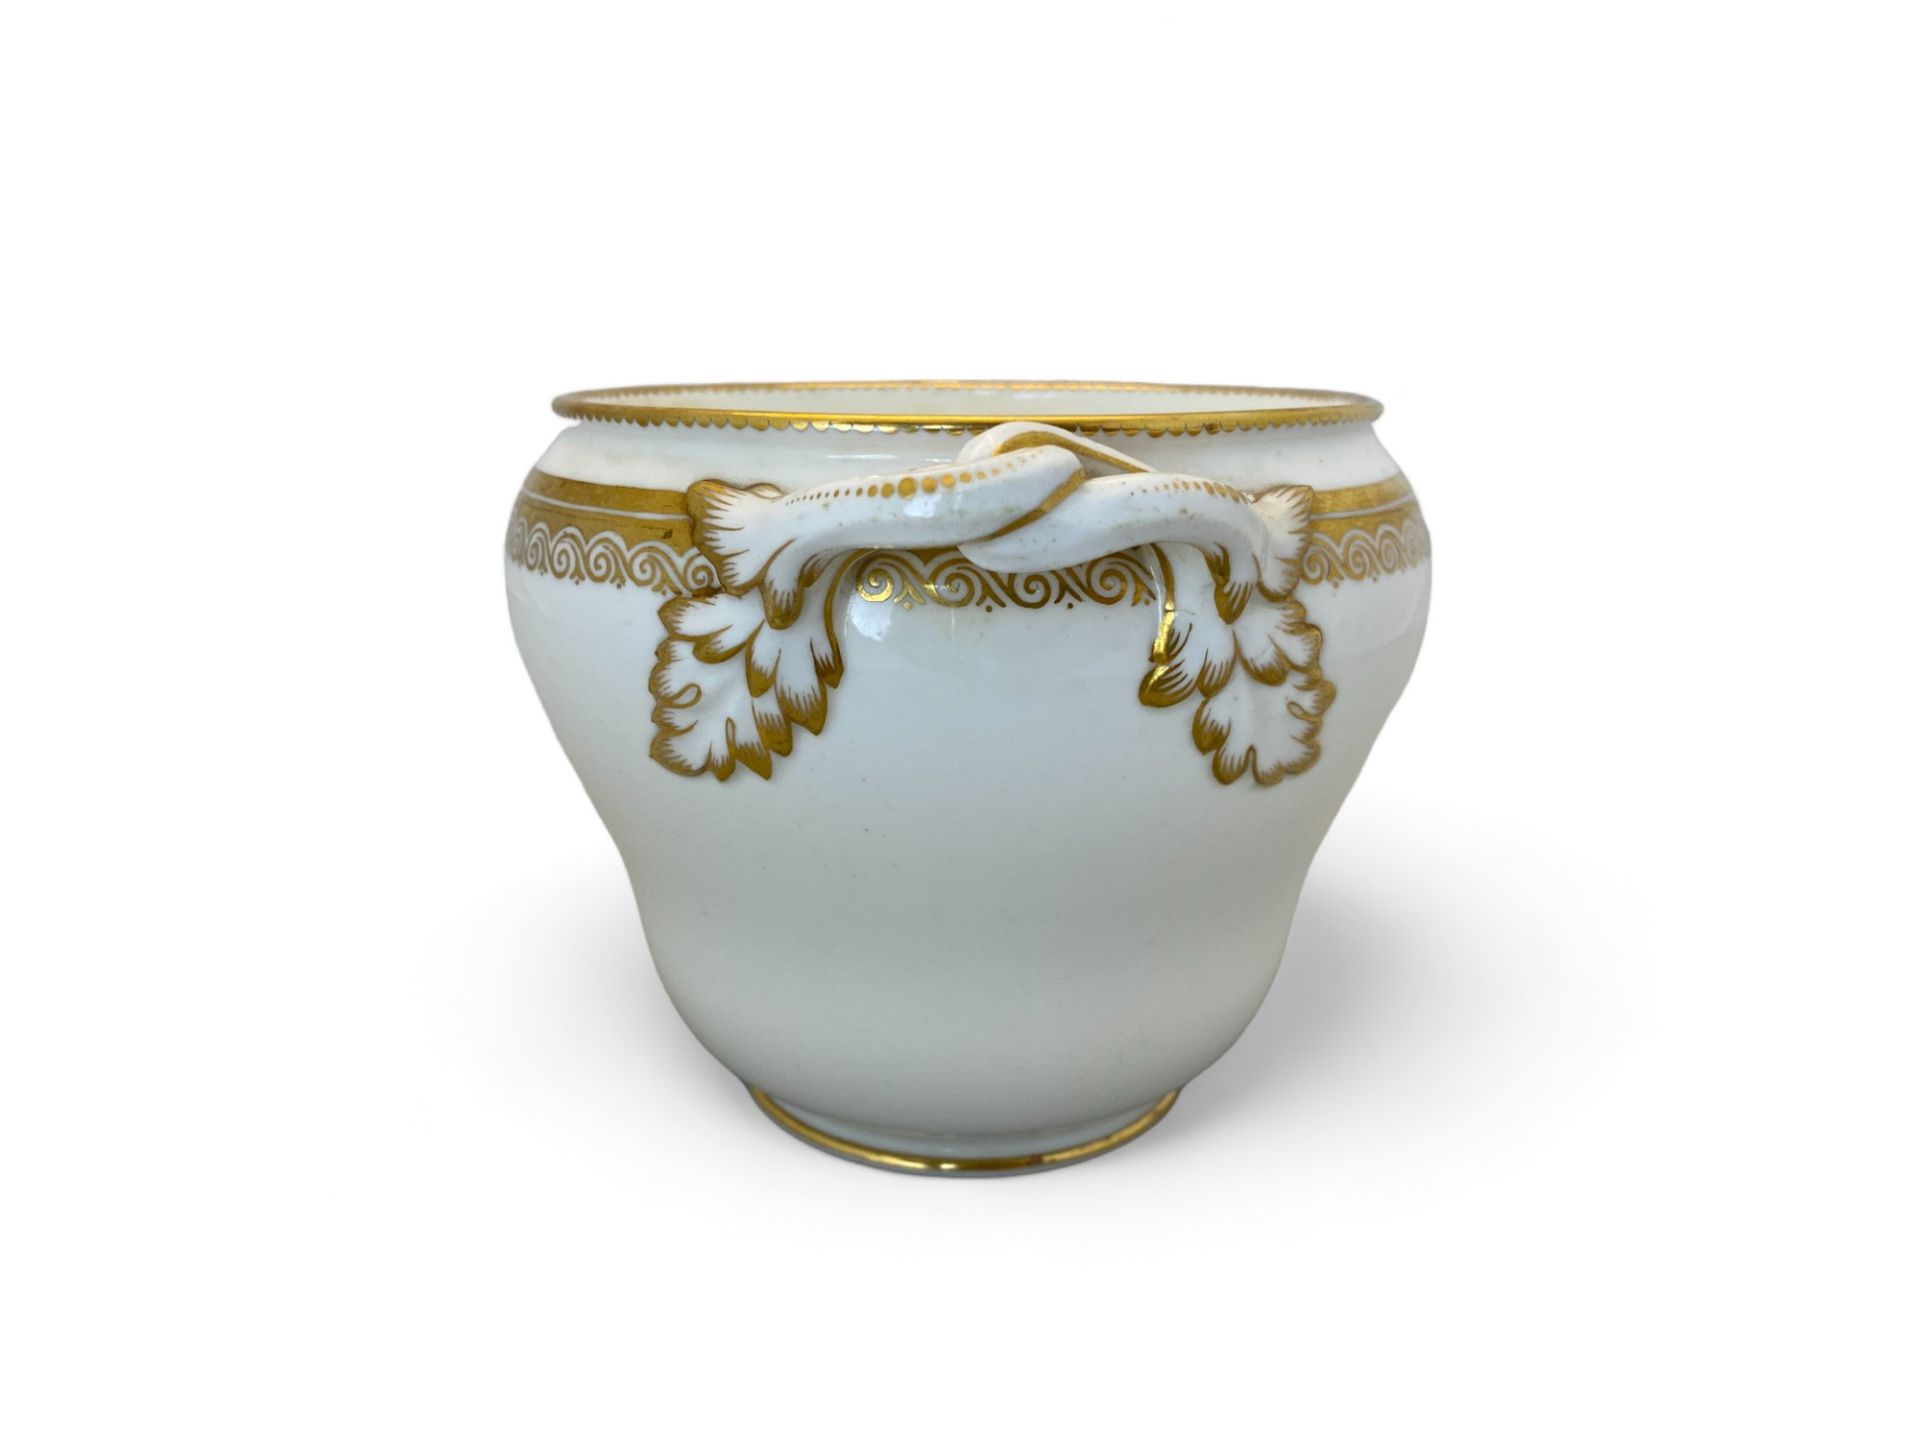 Of Royal Interest: A Mortlock China of Regent St white porcelain and gilt sugar bowl made for Queen - Image 5 of 7